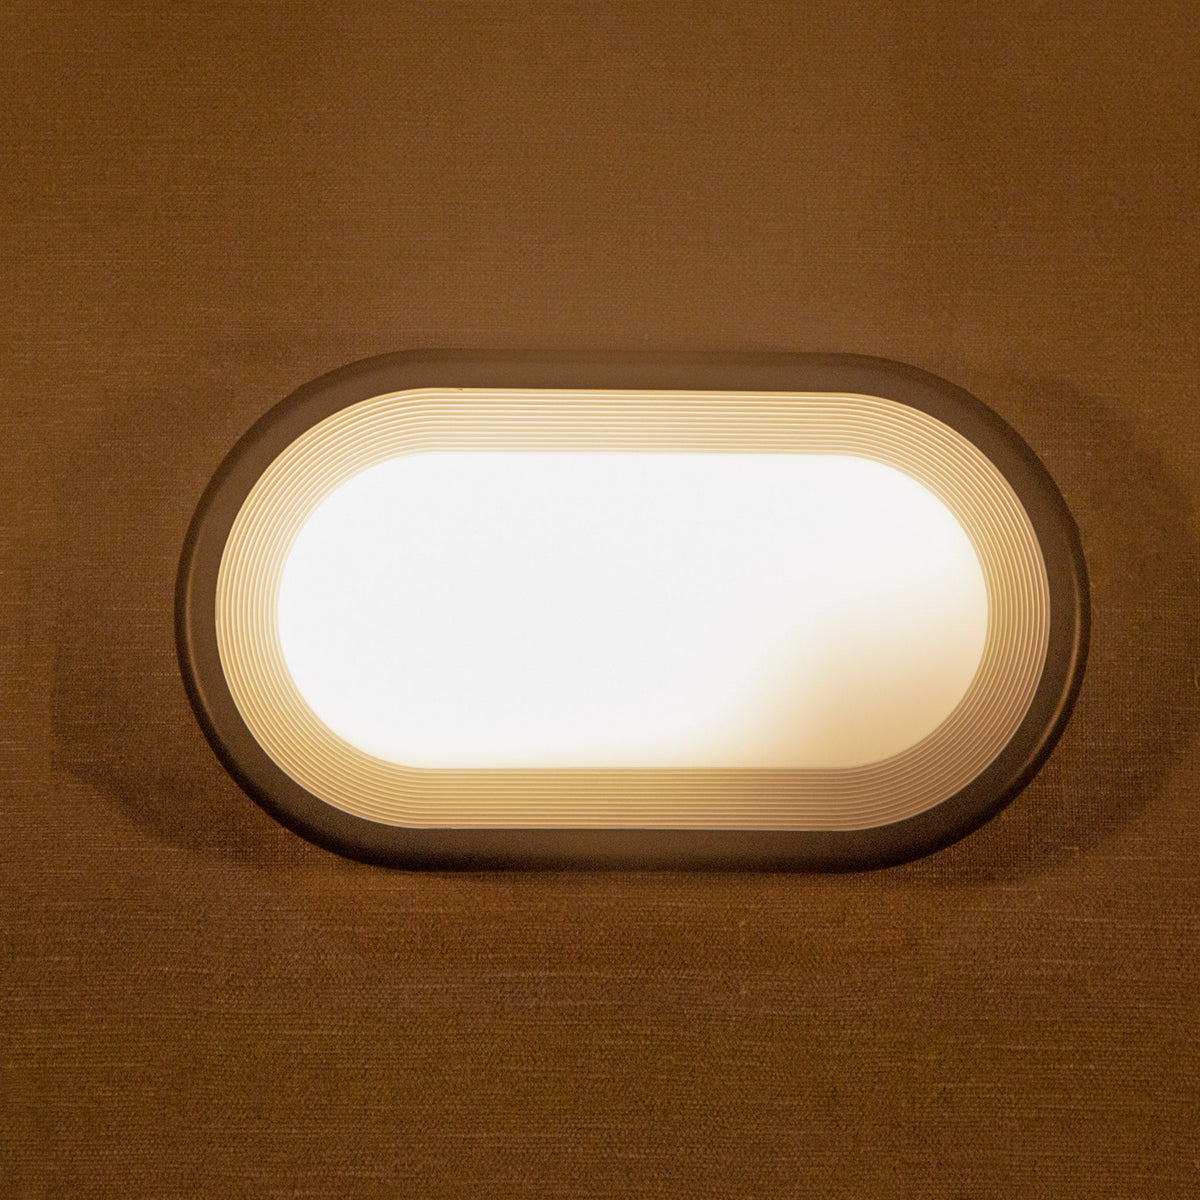 Buy Greece Outdoor LED Wall Light online